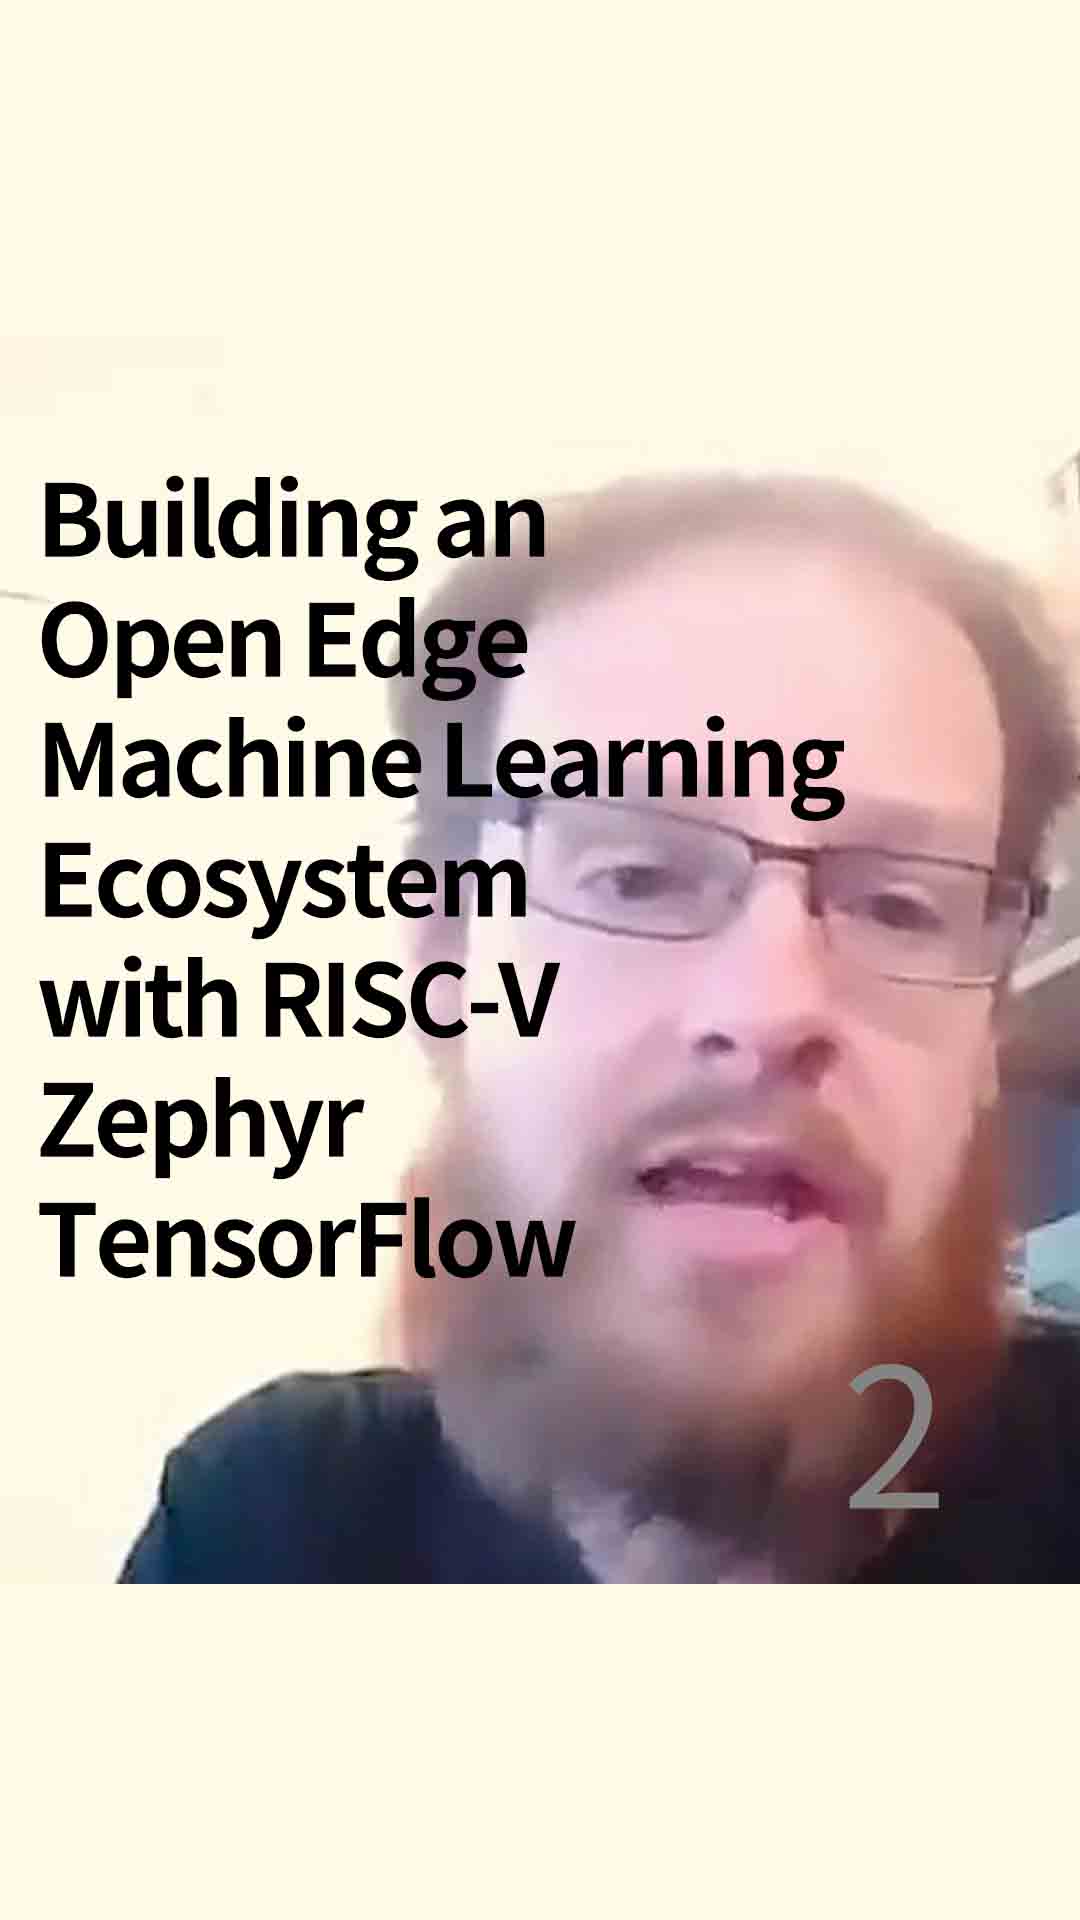 Building an Open Edge Machine with RISC-V#RISC-V 